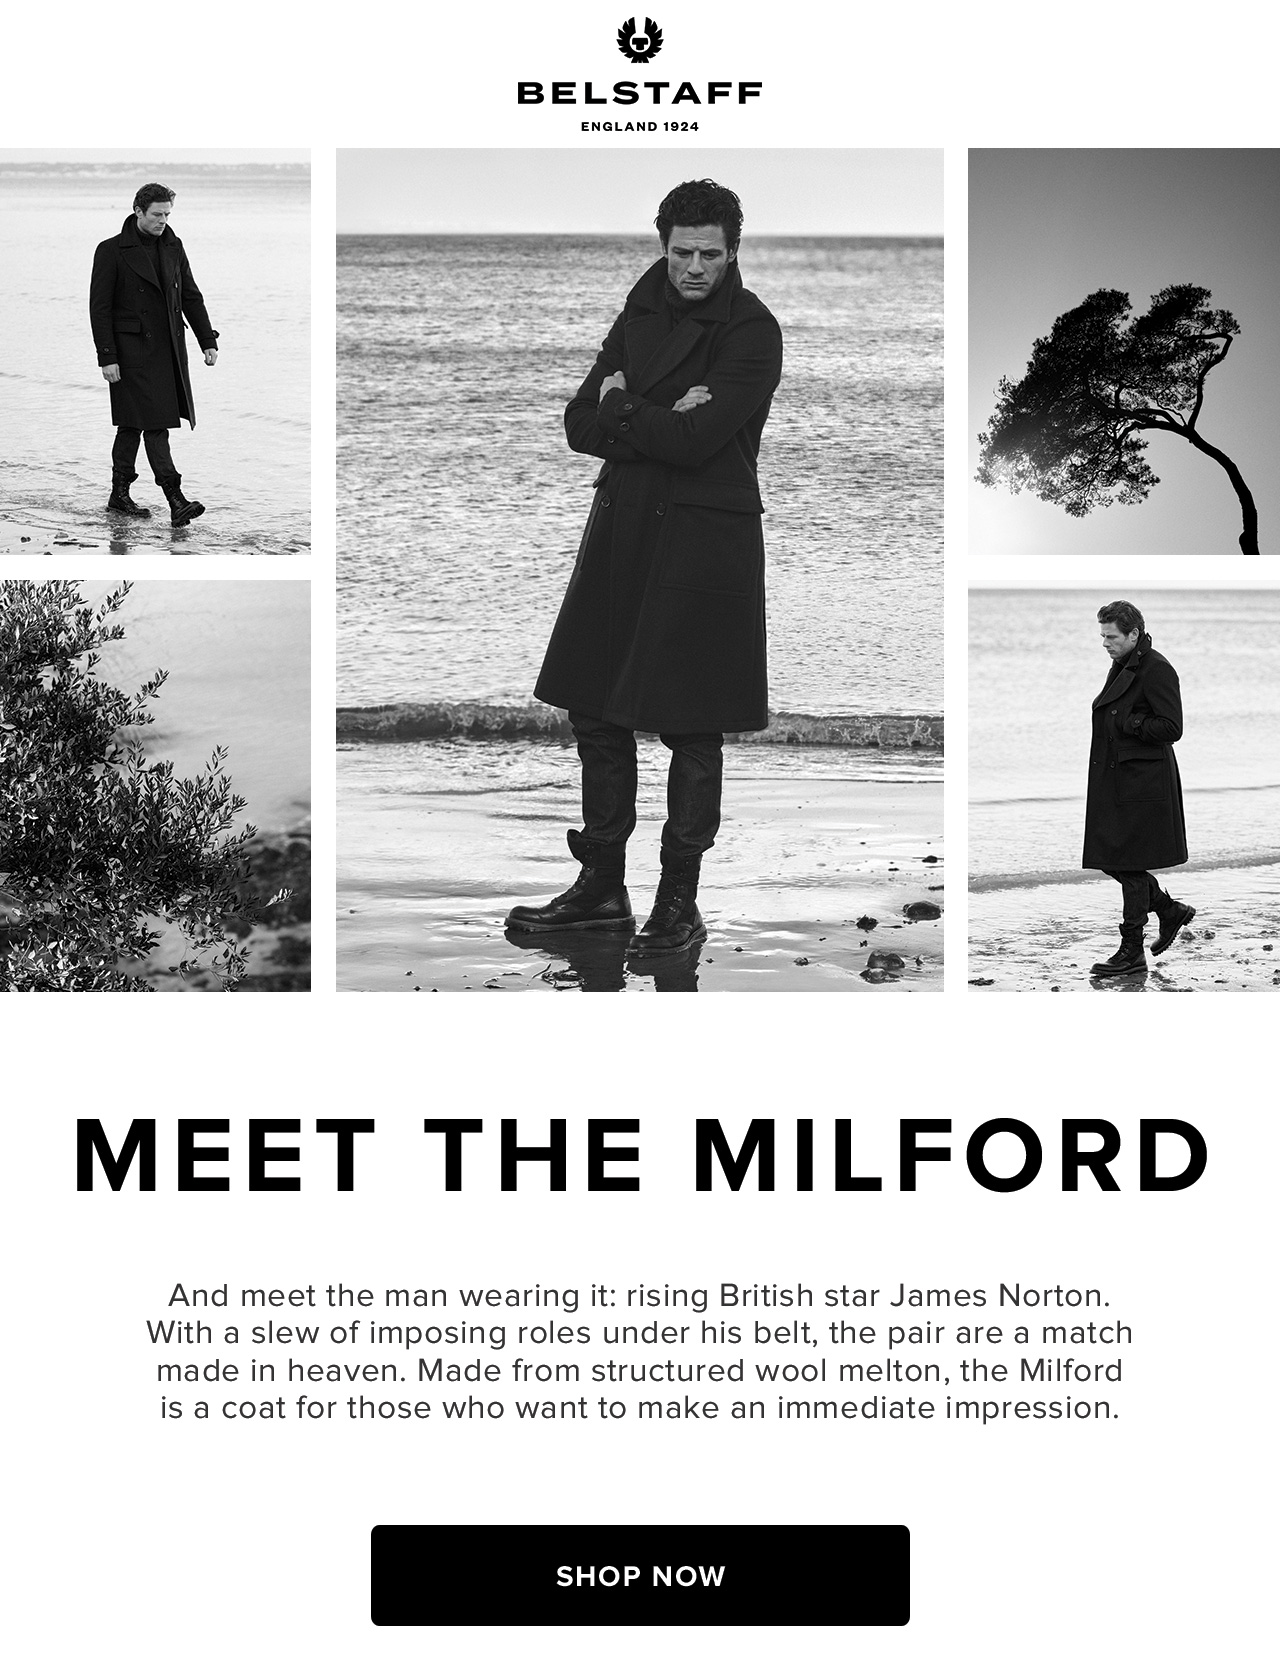 And meet the man wearing it: rising British star James Norton. With a slew of imposing roles under his belt, the pair are a match made in heaven. Made from structured wool melton, the Milford is a coat for those who want to make an immediate impression. 